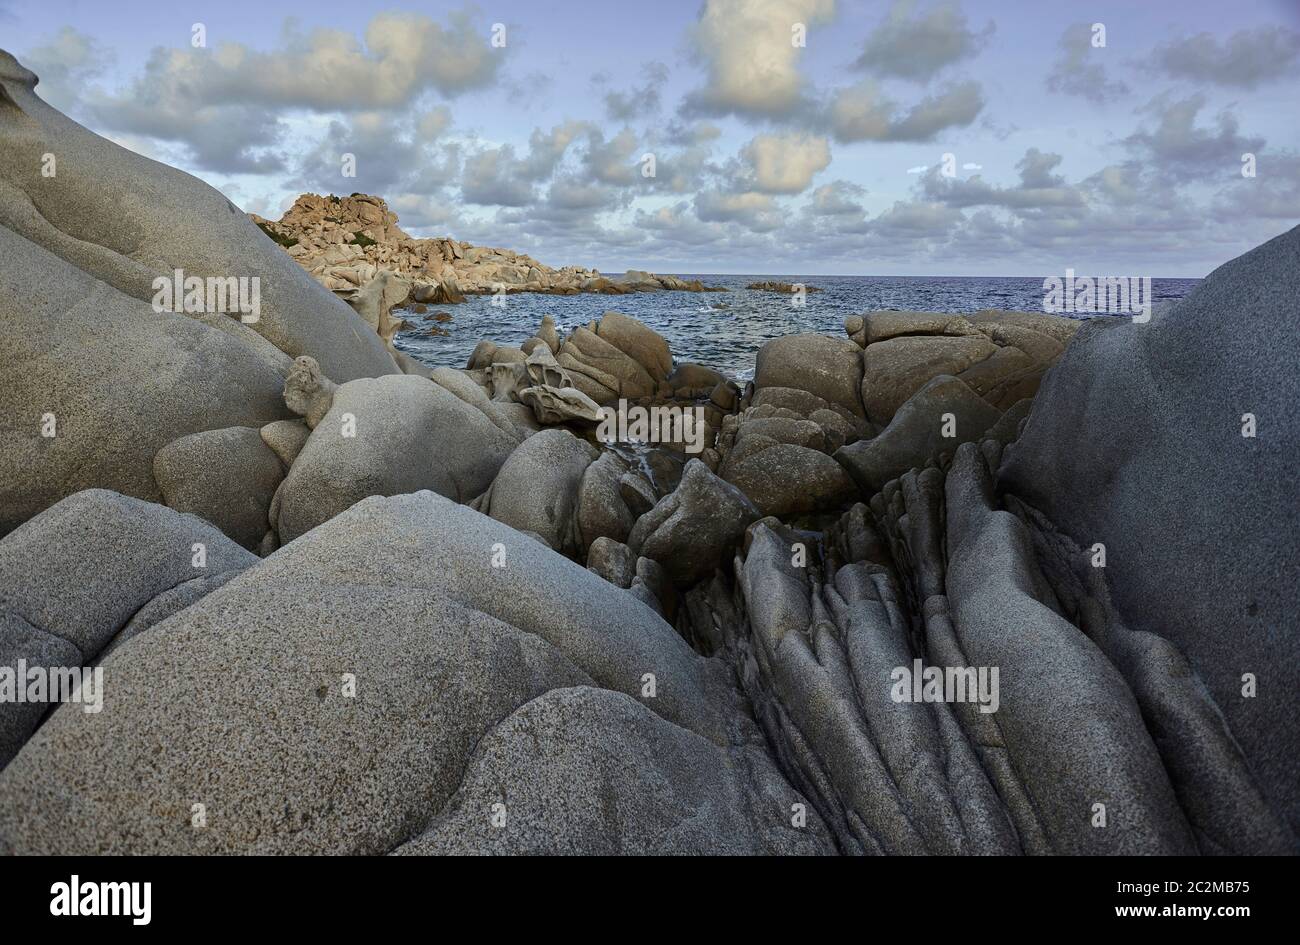 Detail of the southern coastline of Sardinia, precisely in the locality of Punta Molentis: a coastline with particular shapes given by the granite roc Stock Photo